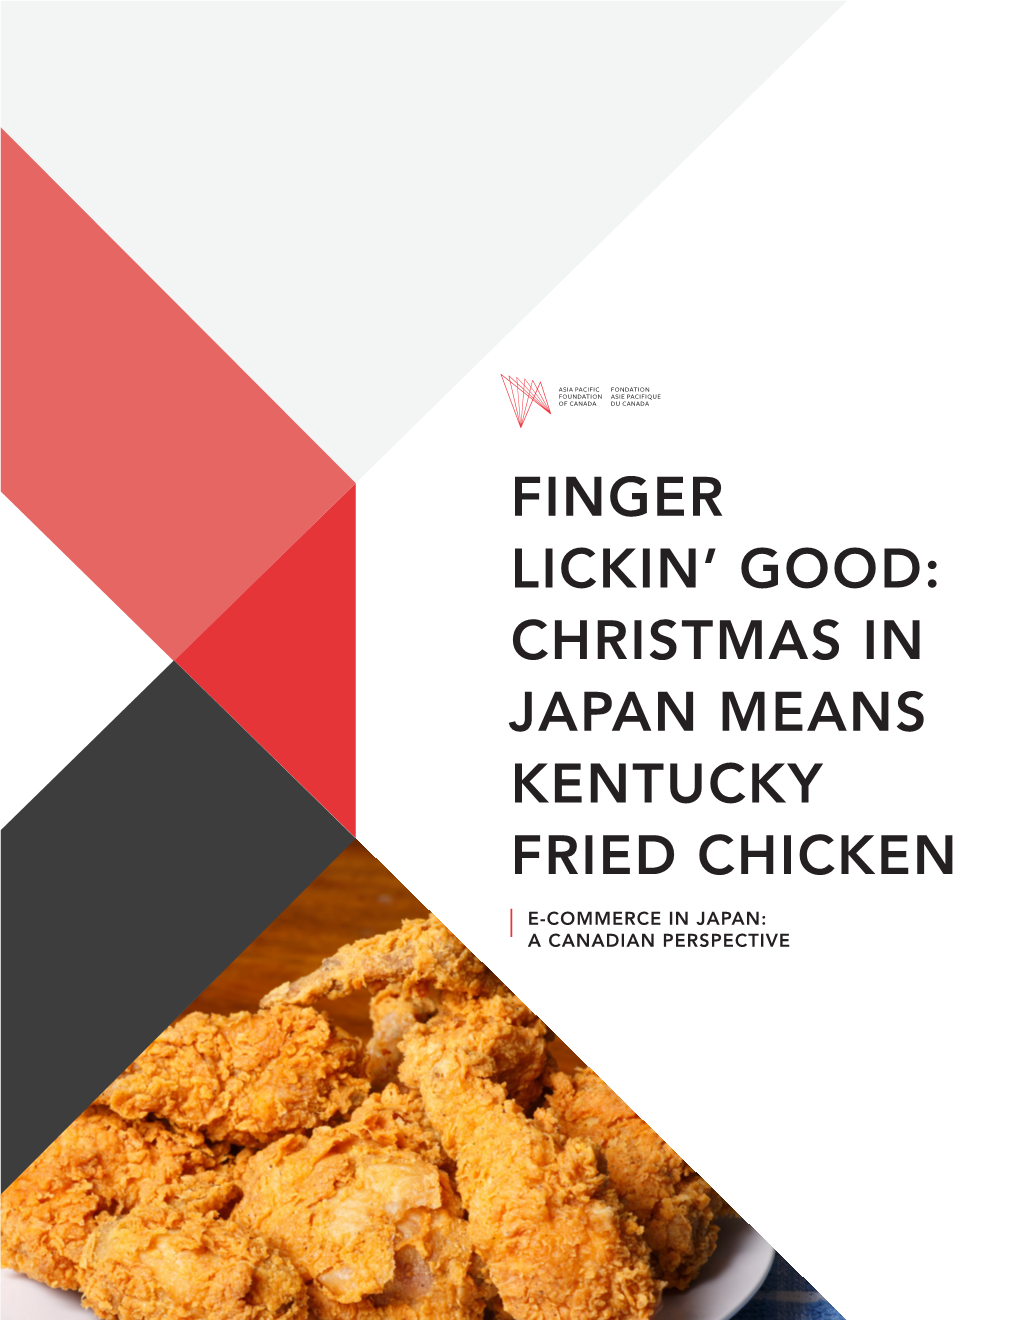 Christmas in Japan Means Kentucky Fried Chicken